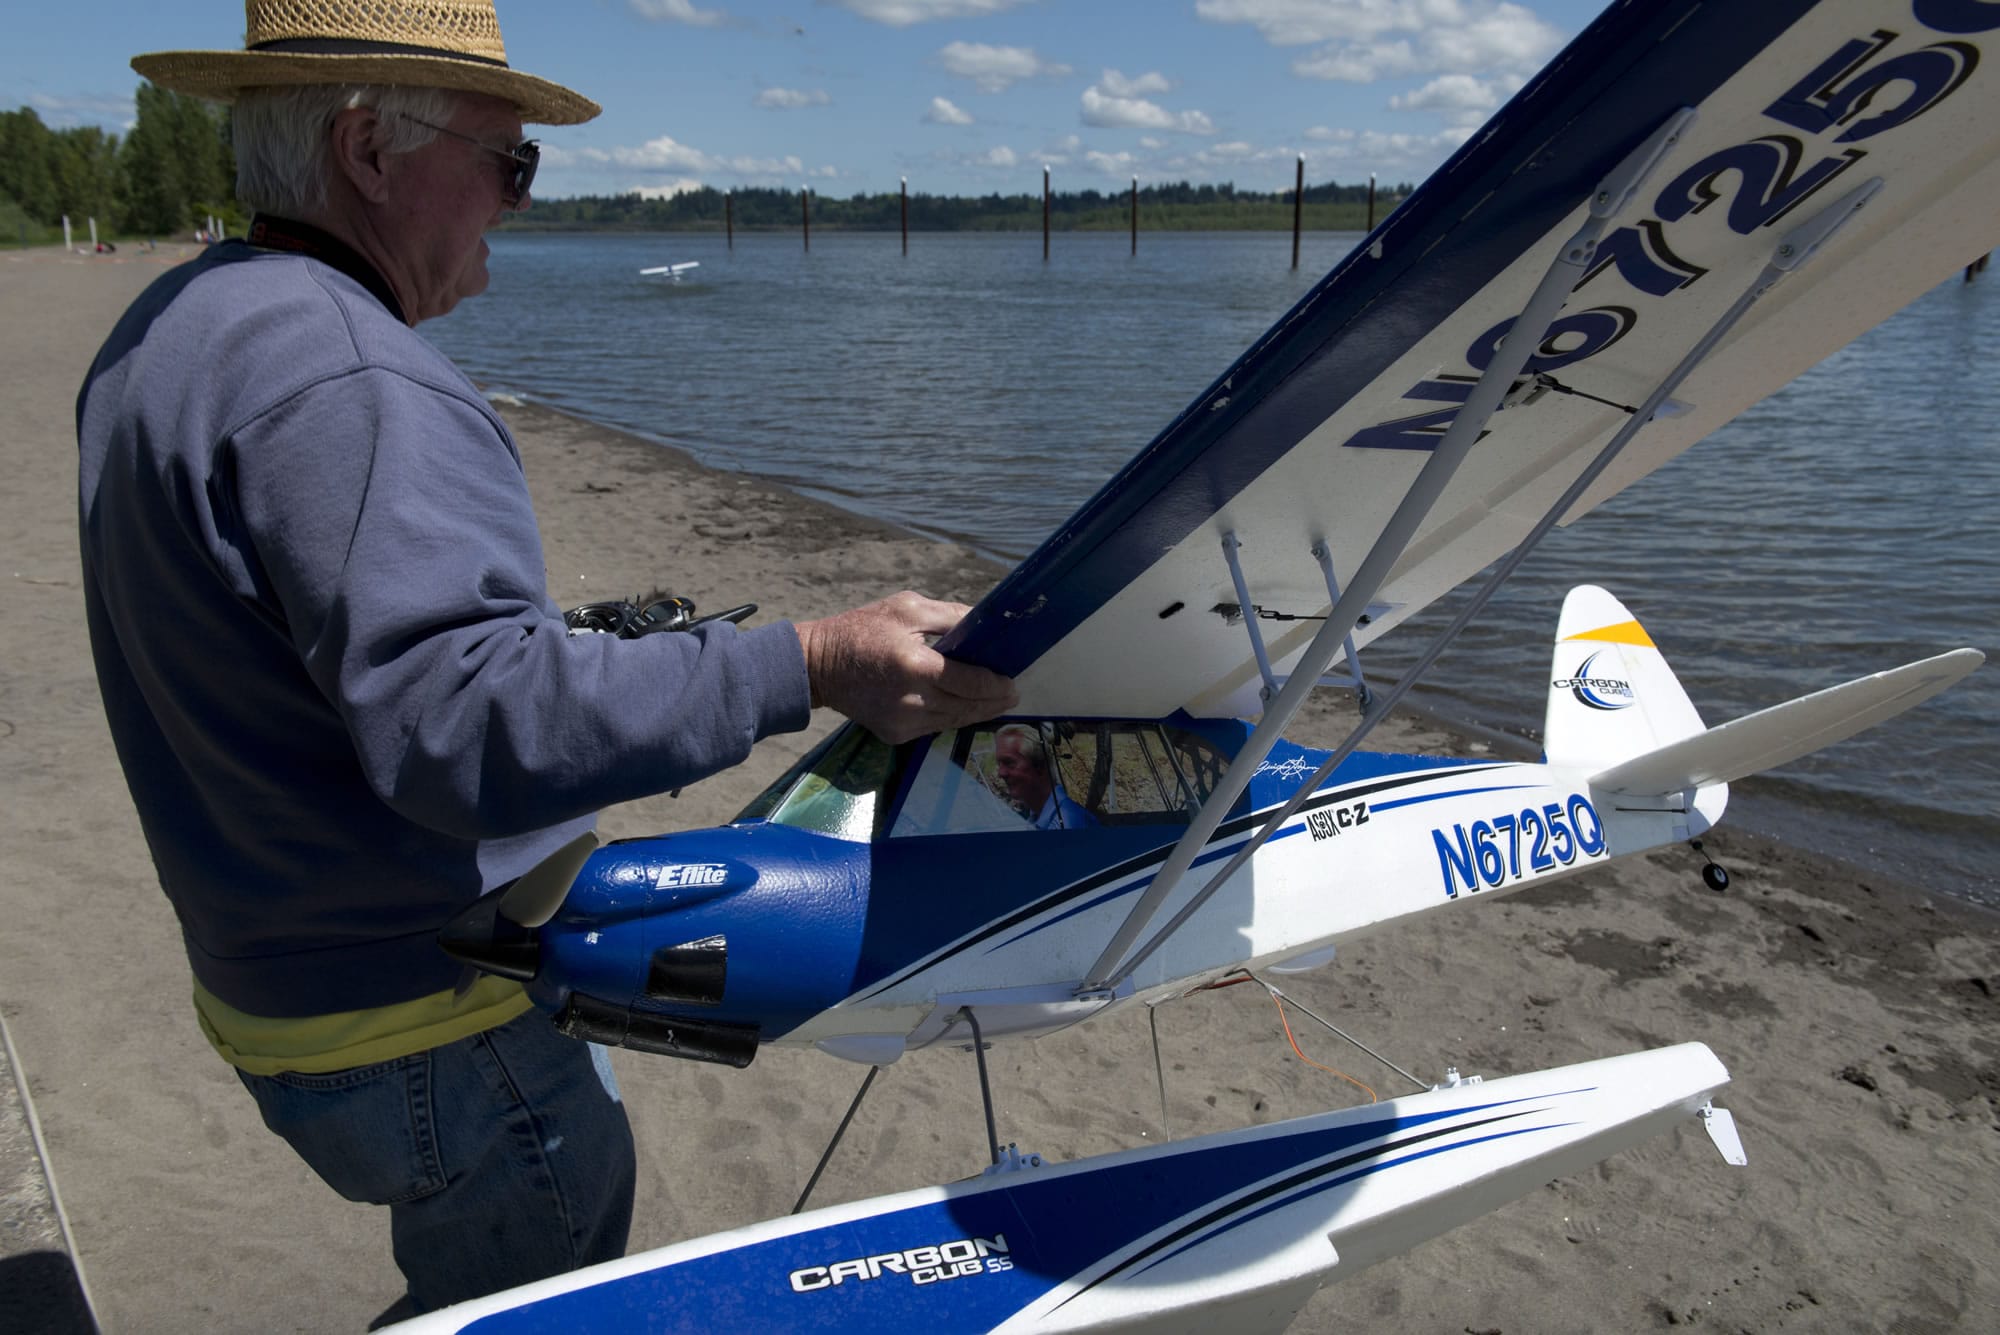 Jeff McIlvenna, of Vancouver, owns 52 RC planes including this one with his own photo "piloting" the plane at the Clark Co. Radio Control Society's 8th annual Wet Wings event at Vancouver Lake Park on Sunday.